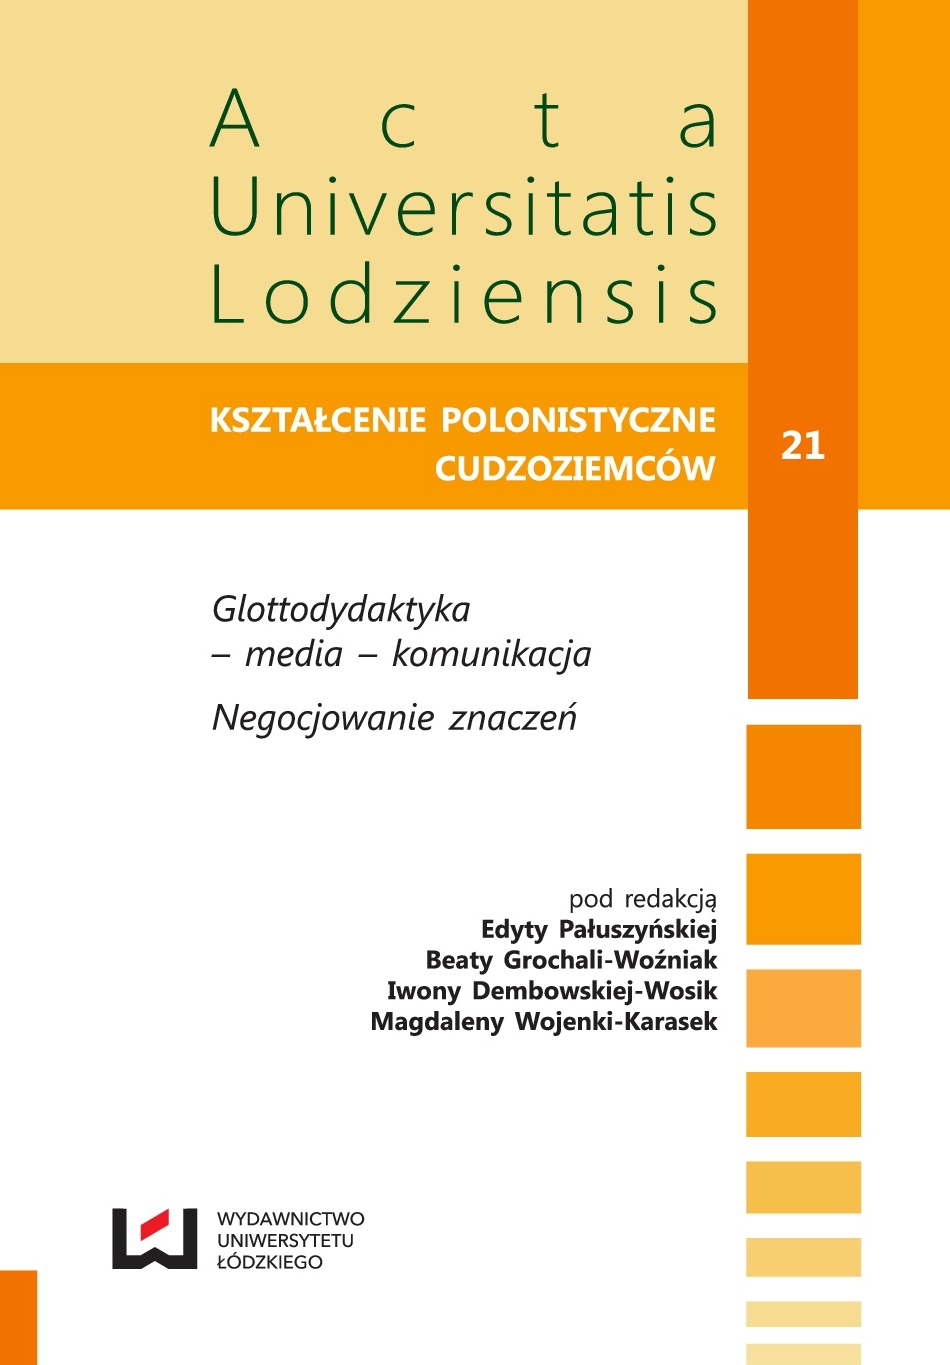 LUDIC ELEMENTS IN TEACHING POLISH AS A FOREIGN LANGUAGE (THE EXAMPLE OF THE SITCOM ŚWIAT WEDŁUG KIEPSKICH) Cover Image